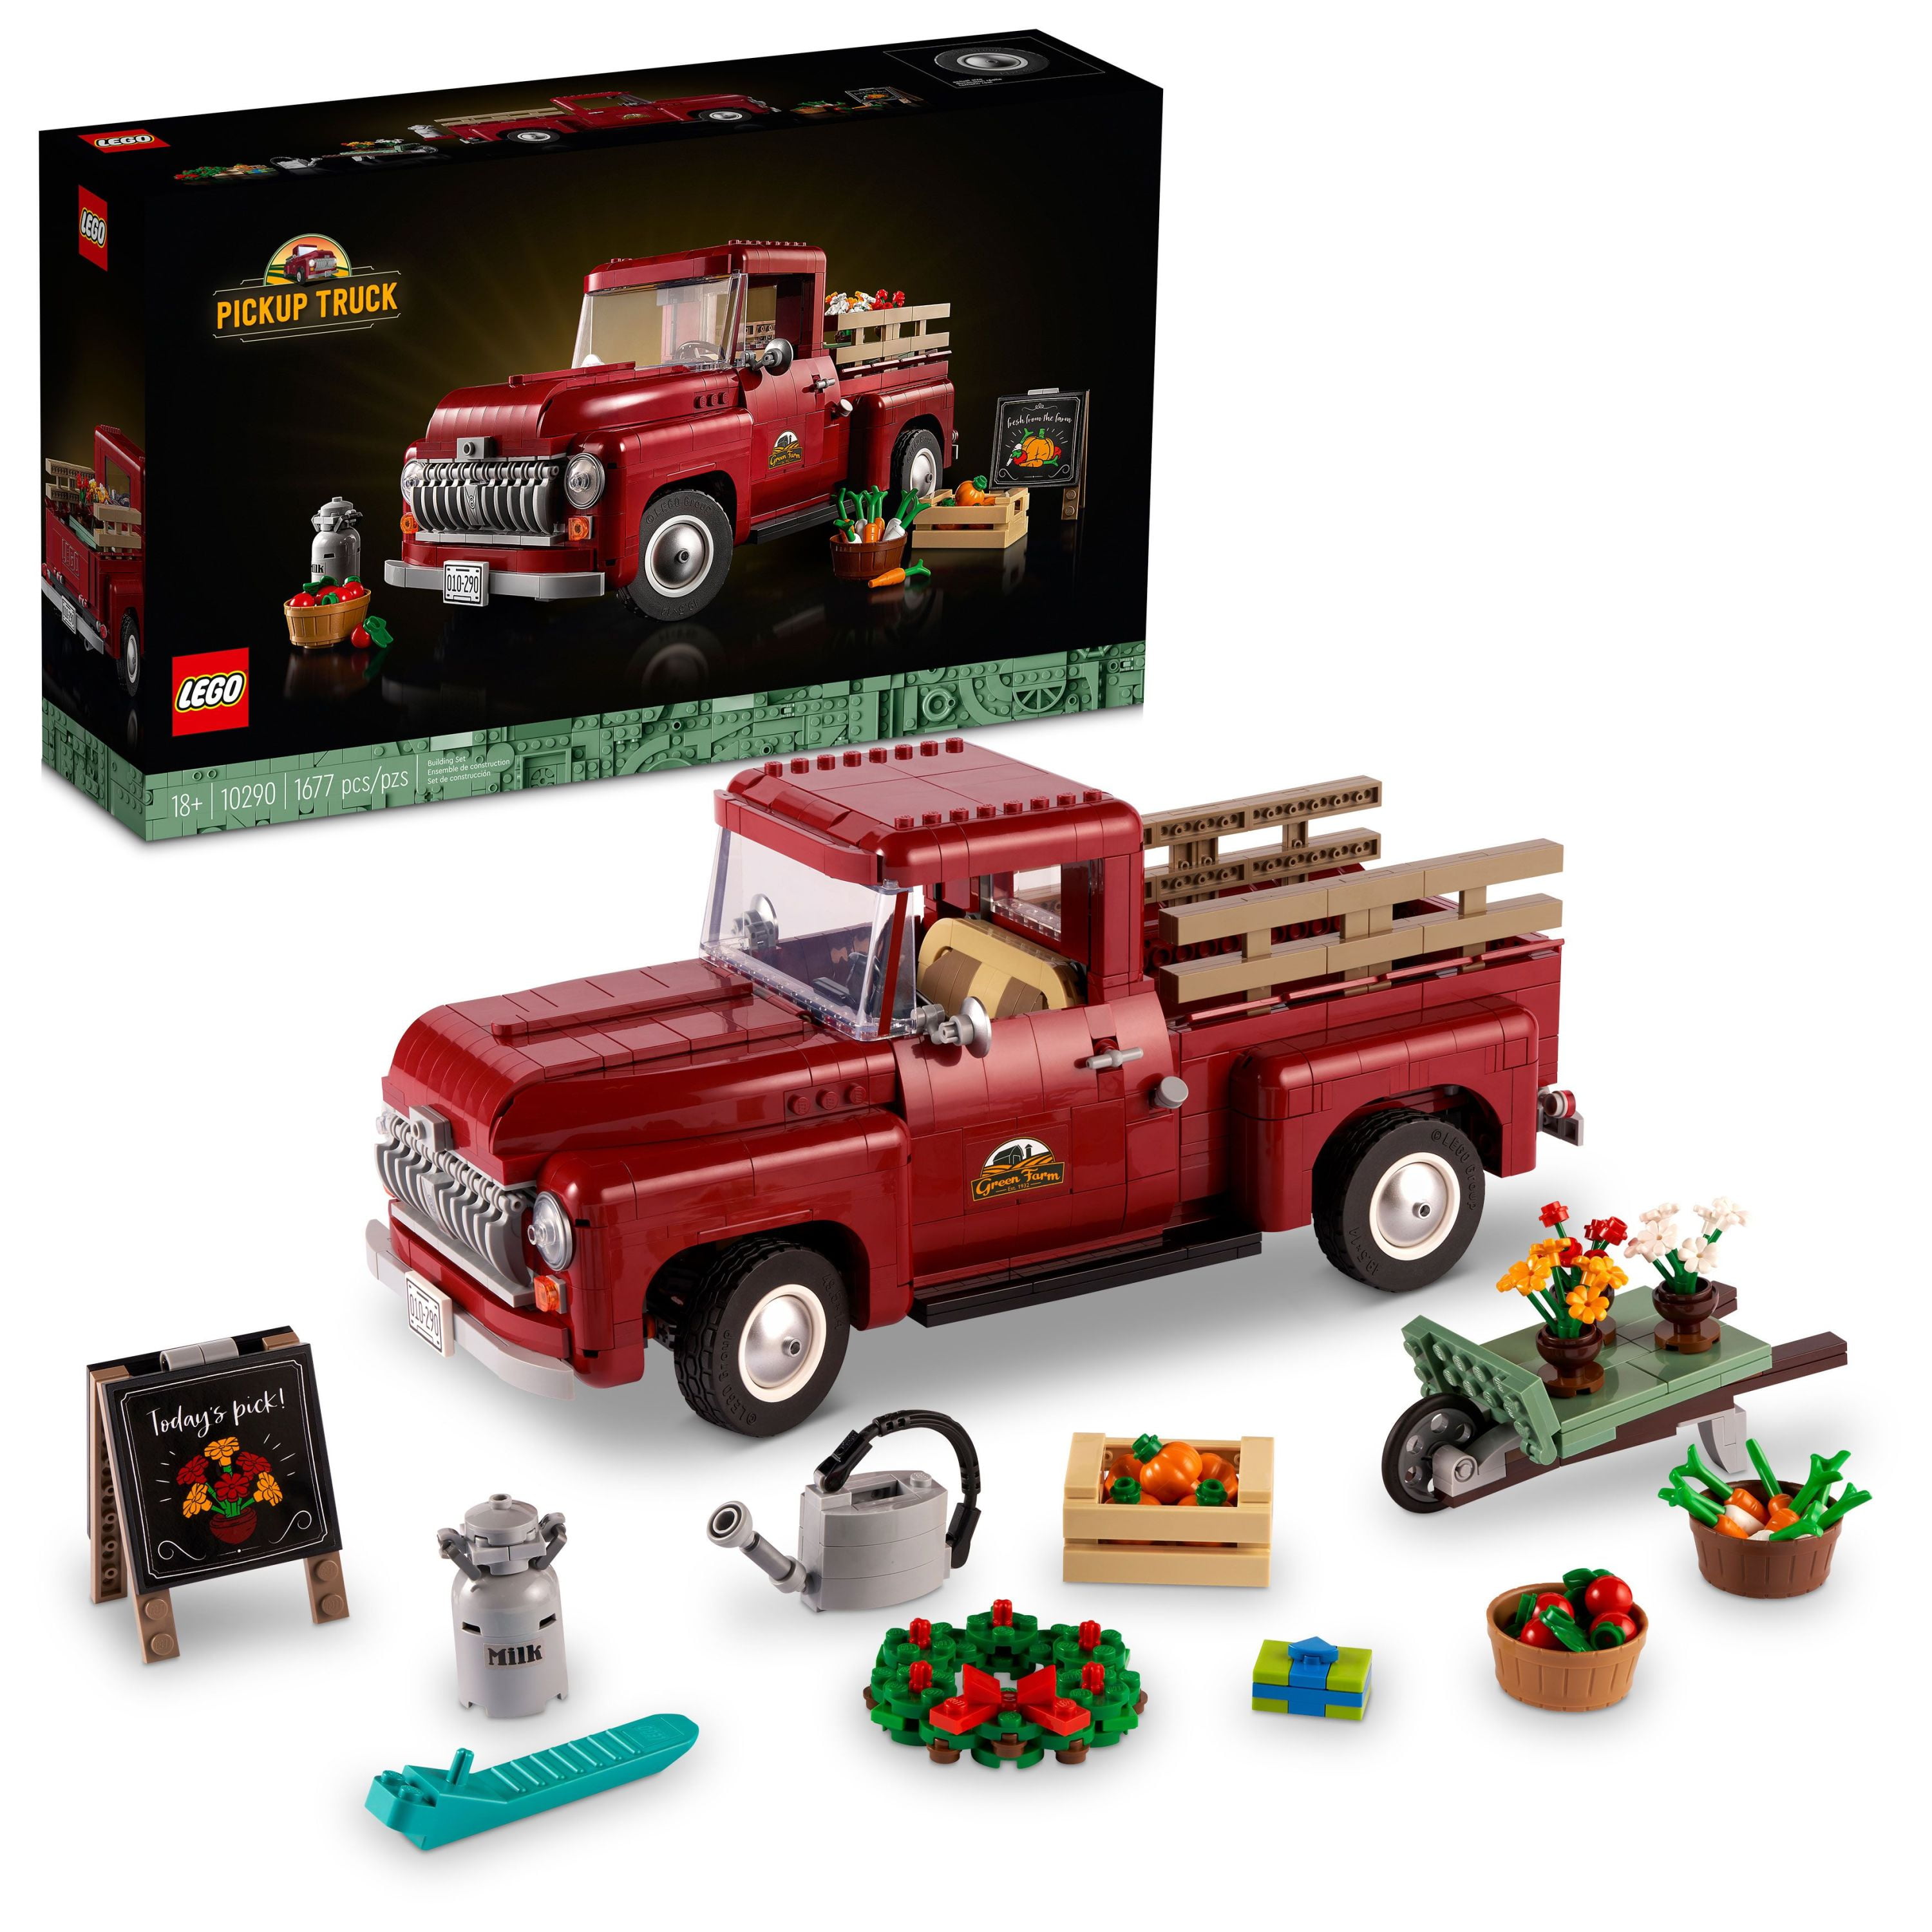 LEGO Icons Pickup Truck 10290 Set for Adults, Vintage 1950s Model with Seasonal Display Accessories, Creative Activity, Collector's Gift Idea - Walmart.com